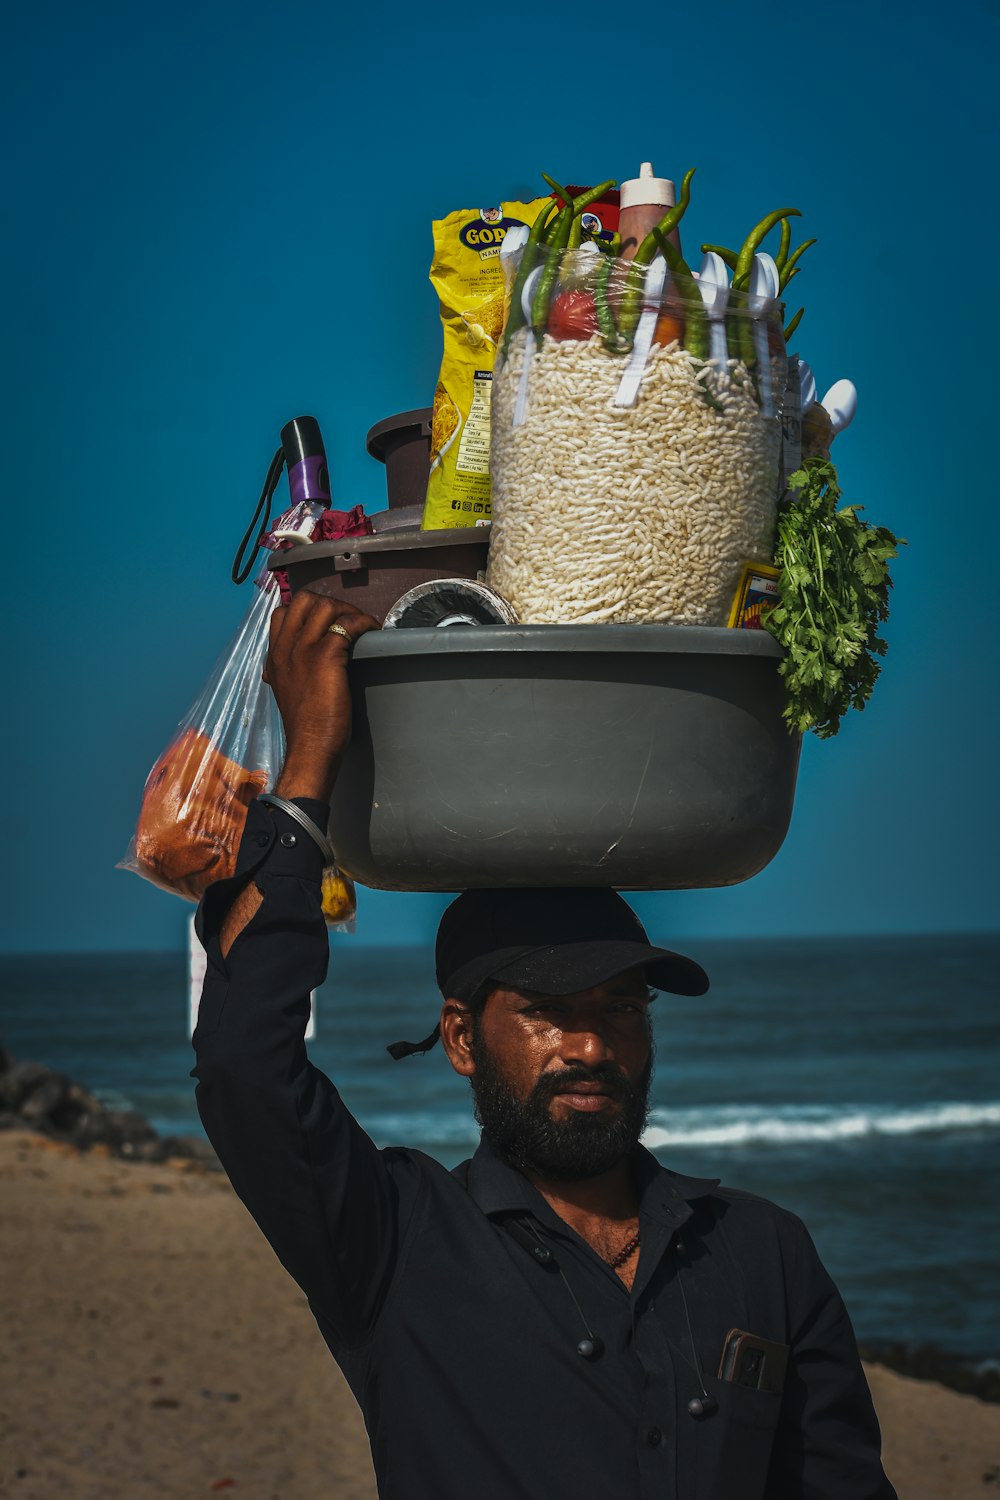 a man carrying a large bowl of food on his head